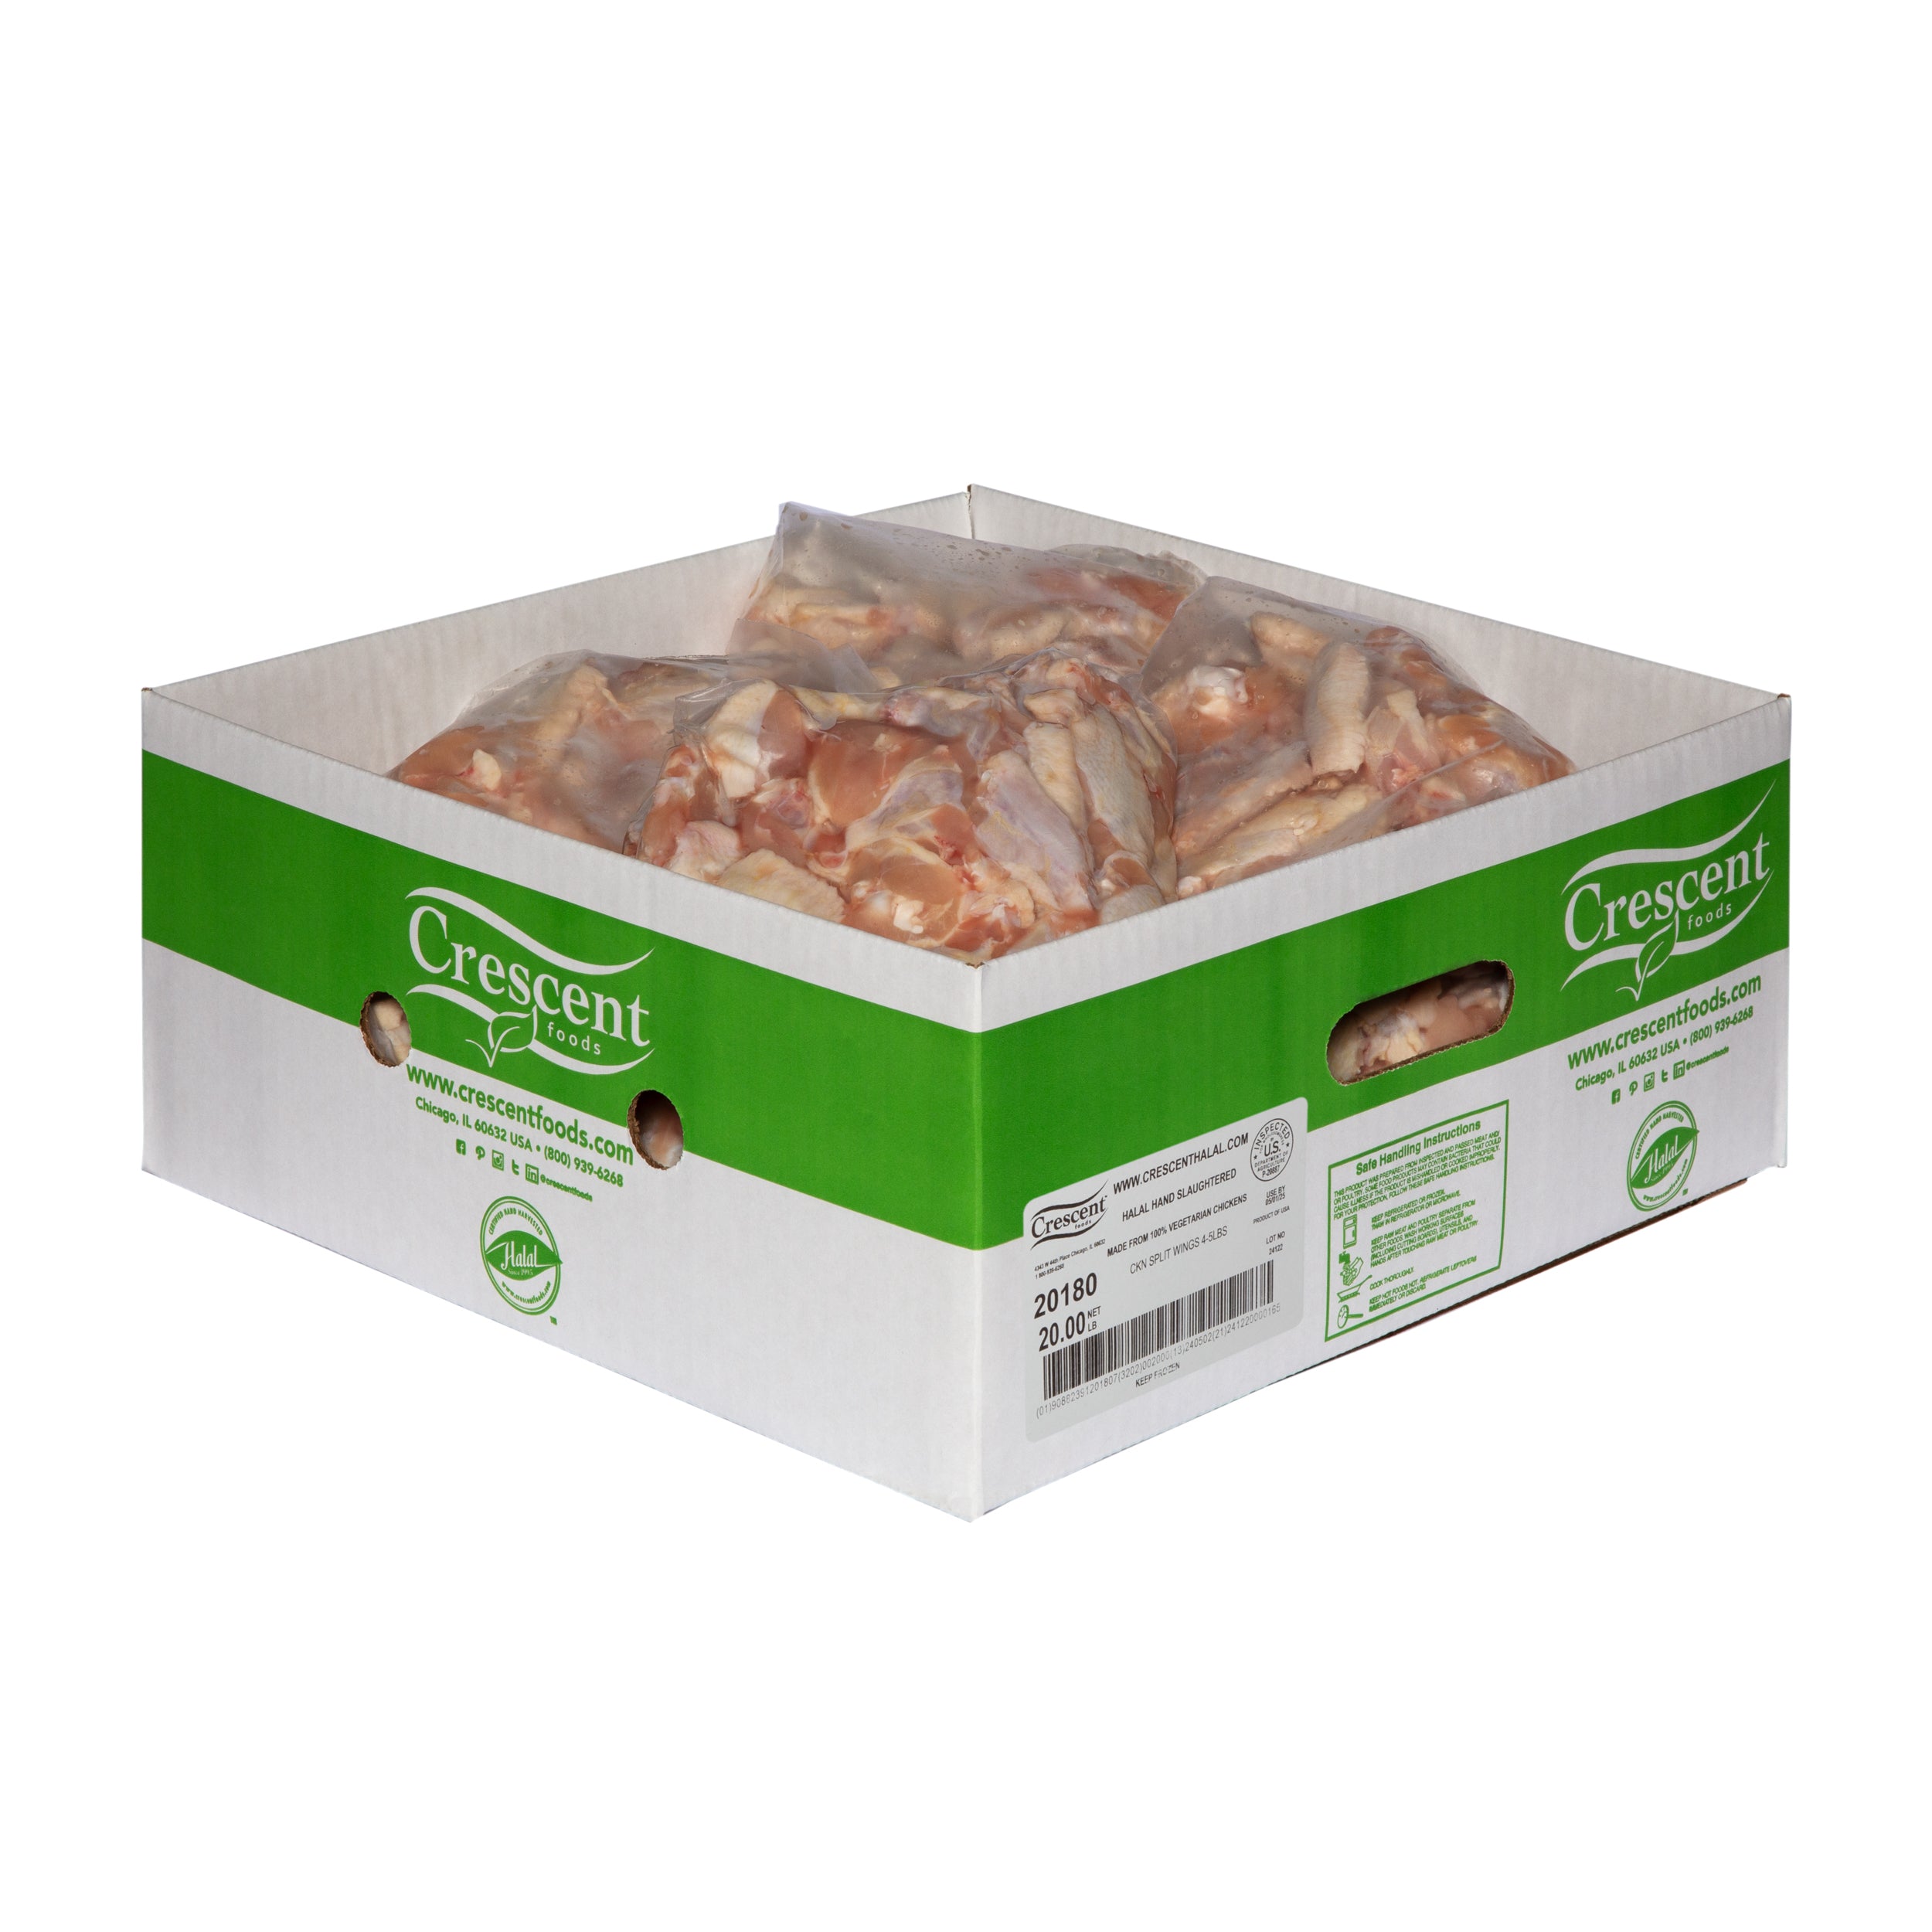 20 Pound Case - All Natural Halal Hand-Cut Party Wings